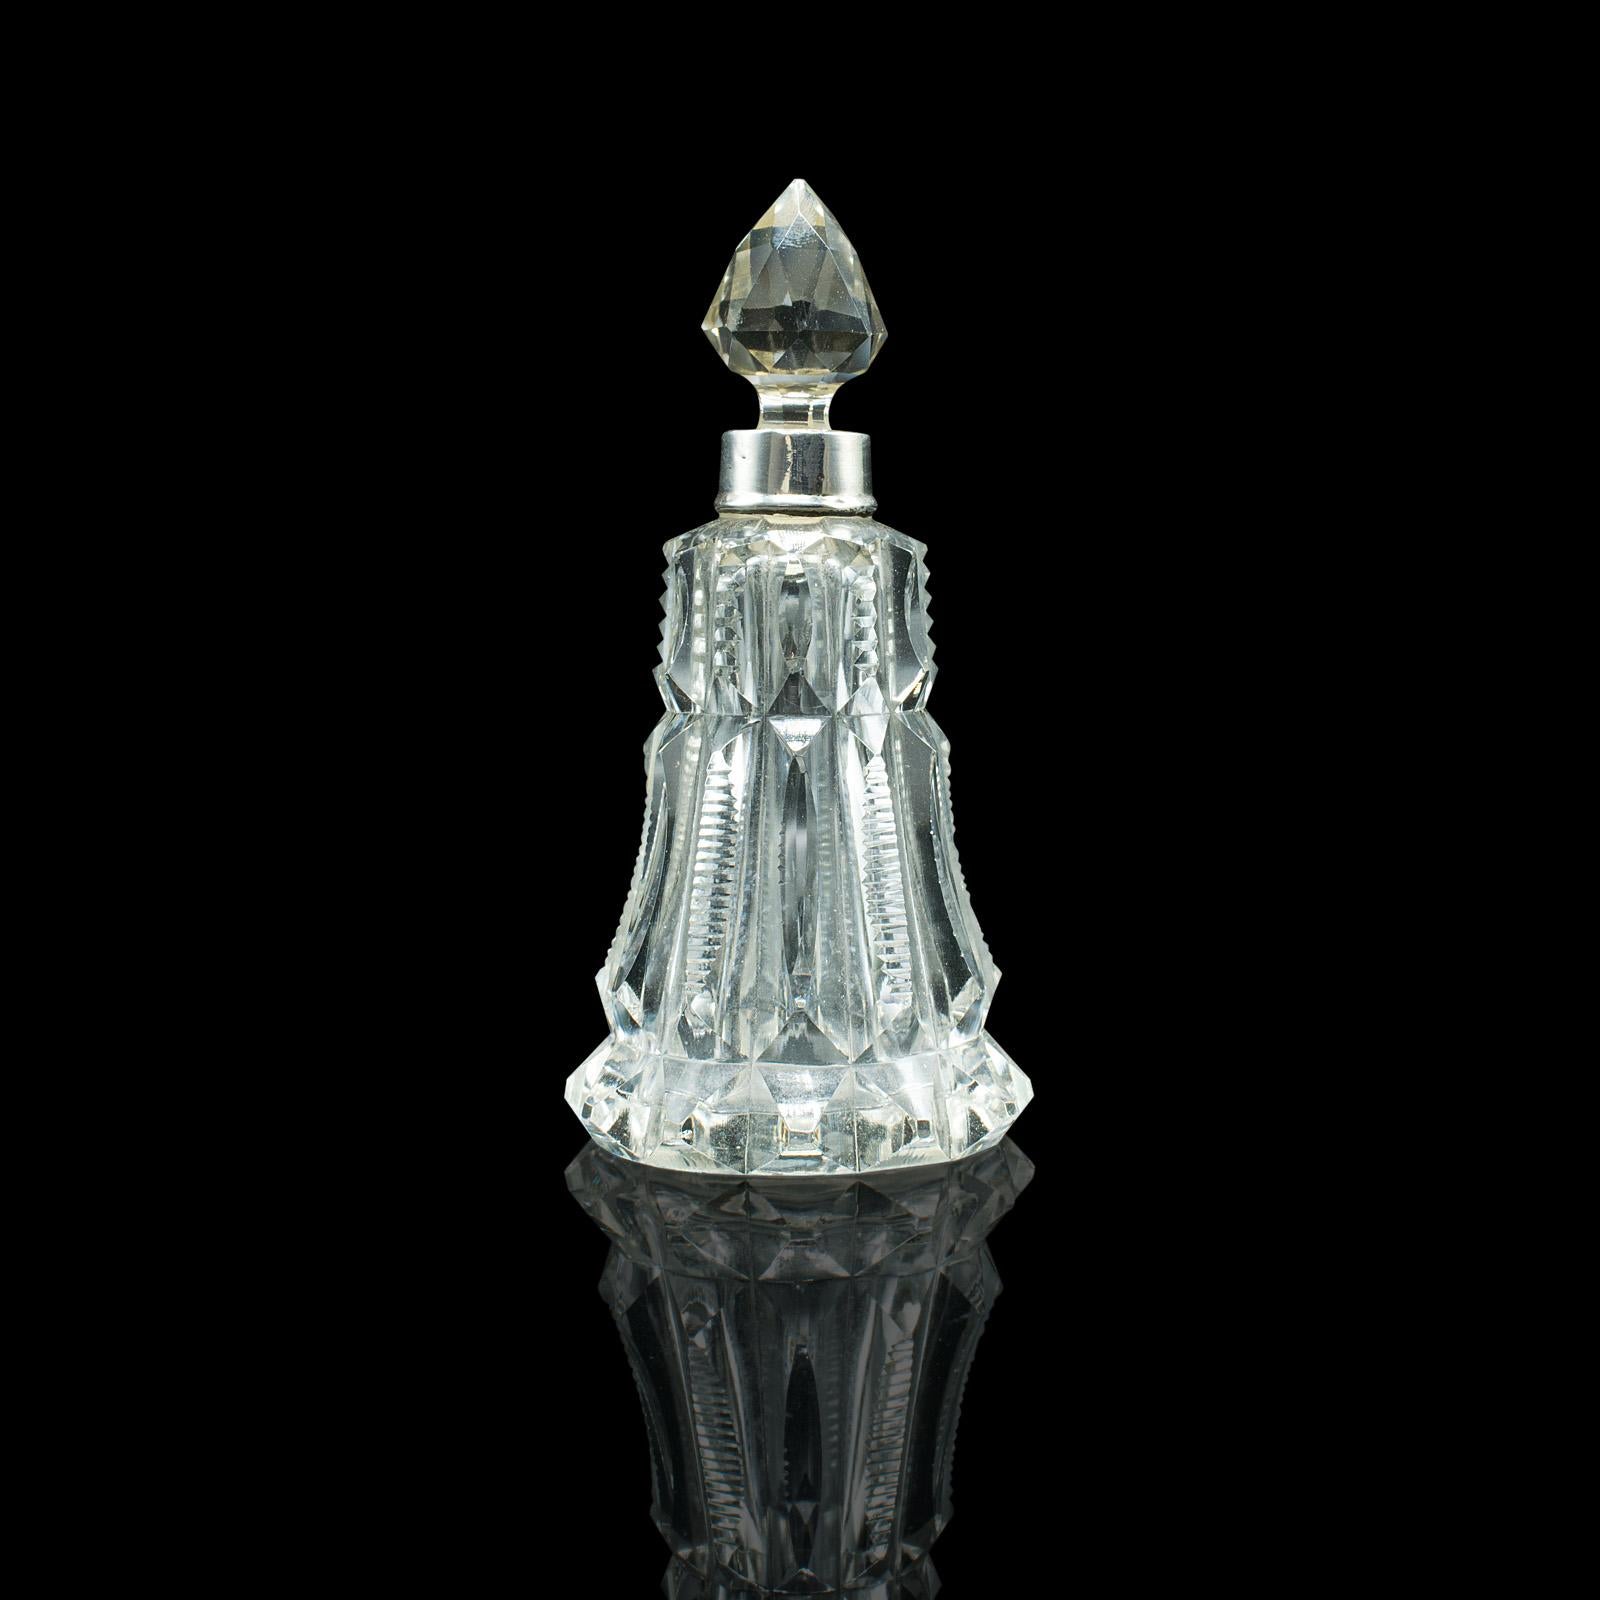 This is an antique tipple decanter. An English, glass and silver collared small spirit vessel, hallmarked to the early 20th century, dated 1922.

Tactile and petite - a pleasingly finished tipple decanter
Displays a desirable aged patina